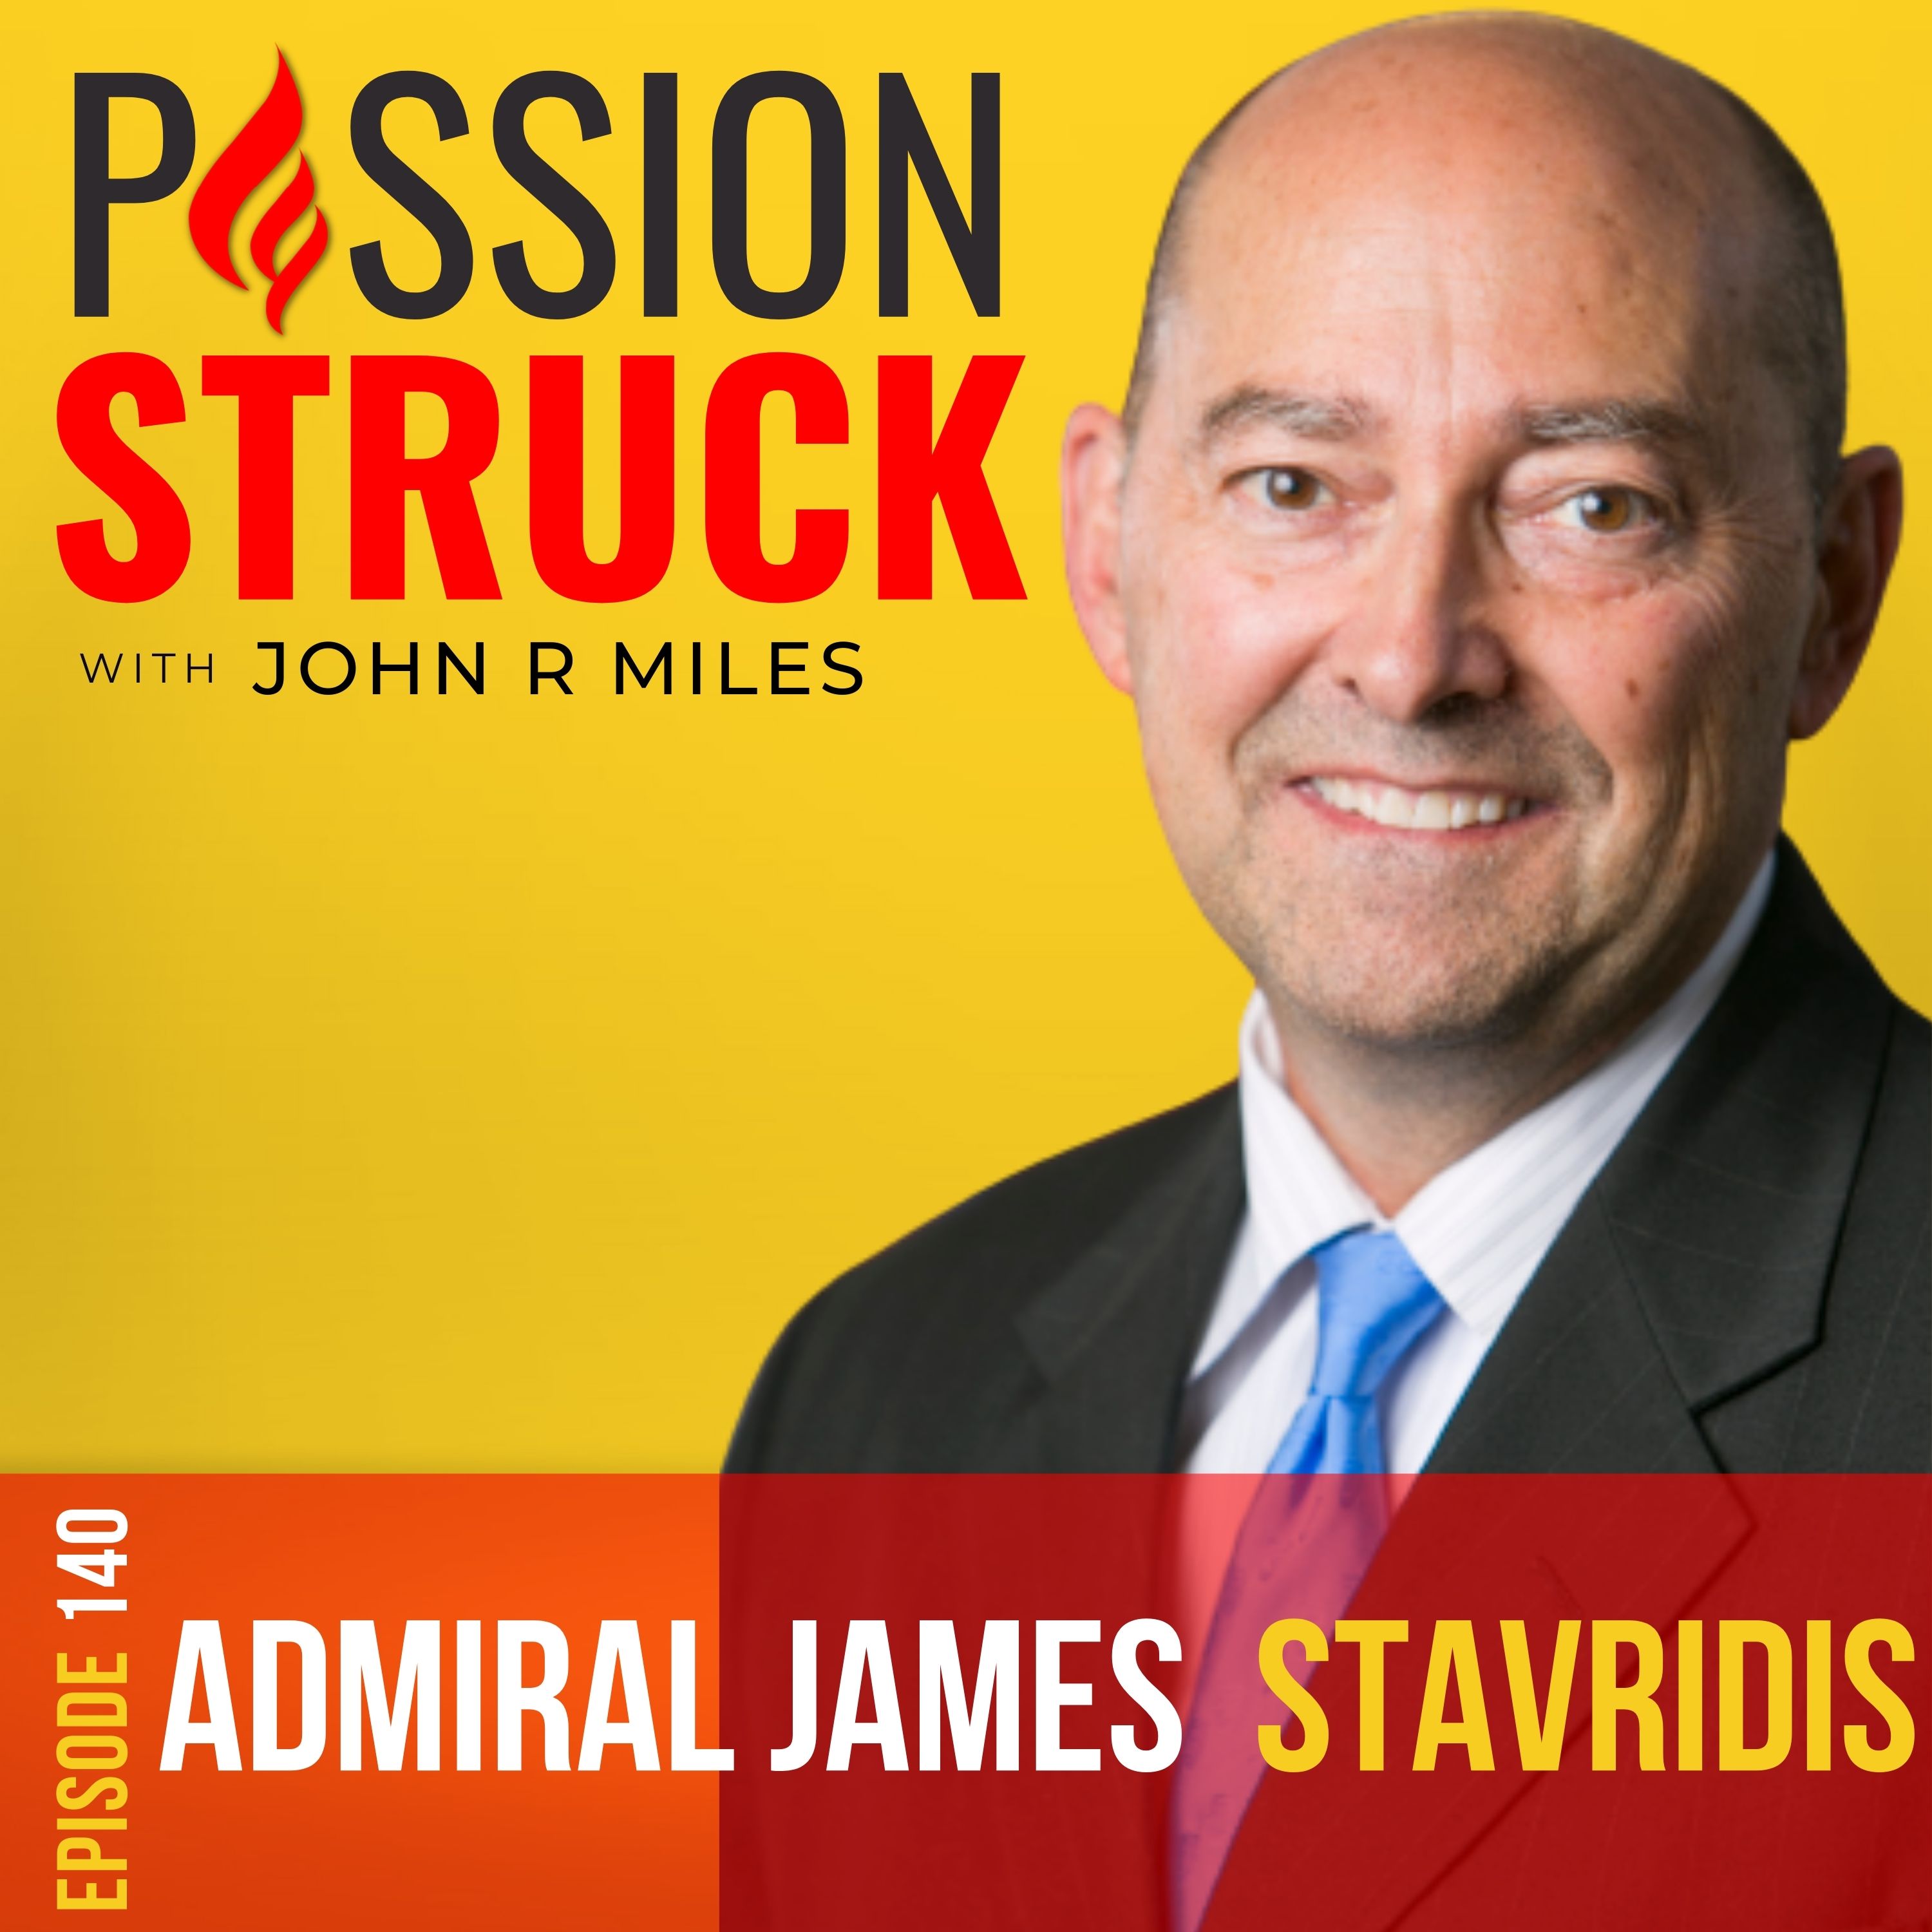 Passion Struck with John R. Miles album cover episode 140 with Admiral James Stavridis on to Risk it All